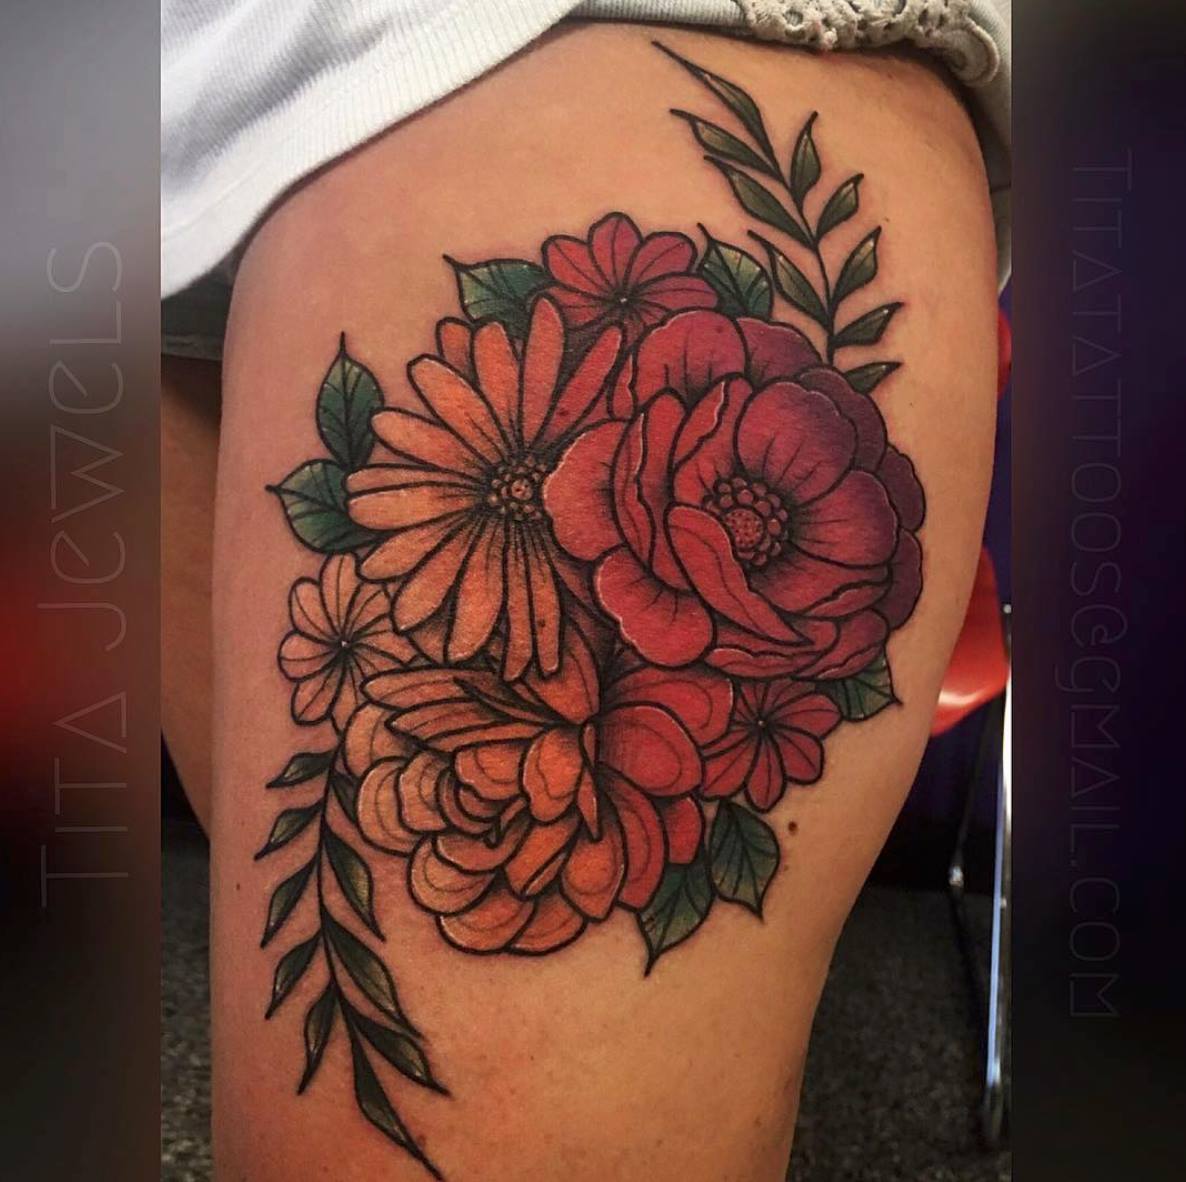 Little Pricks Tattoo Studio Amazing floral tattoo by our